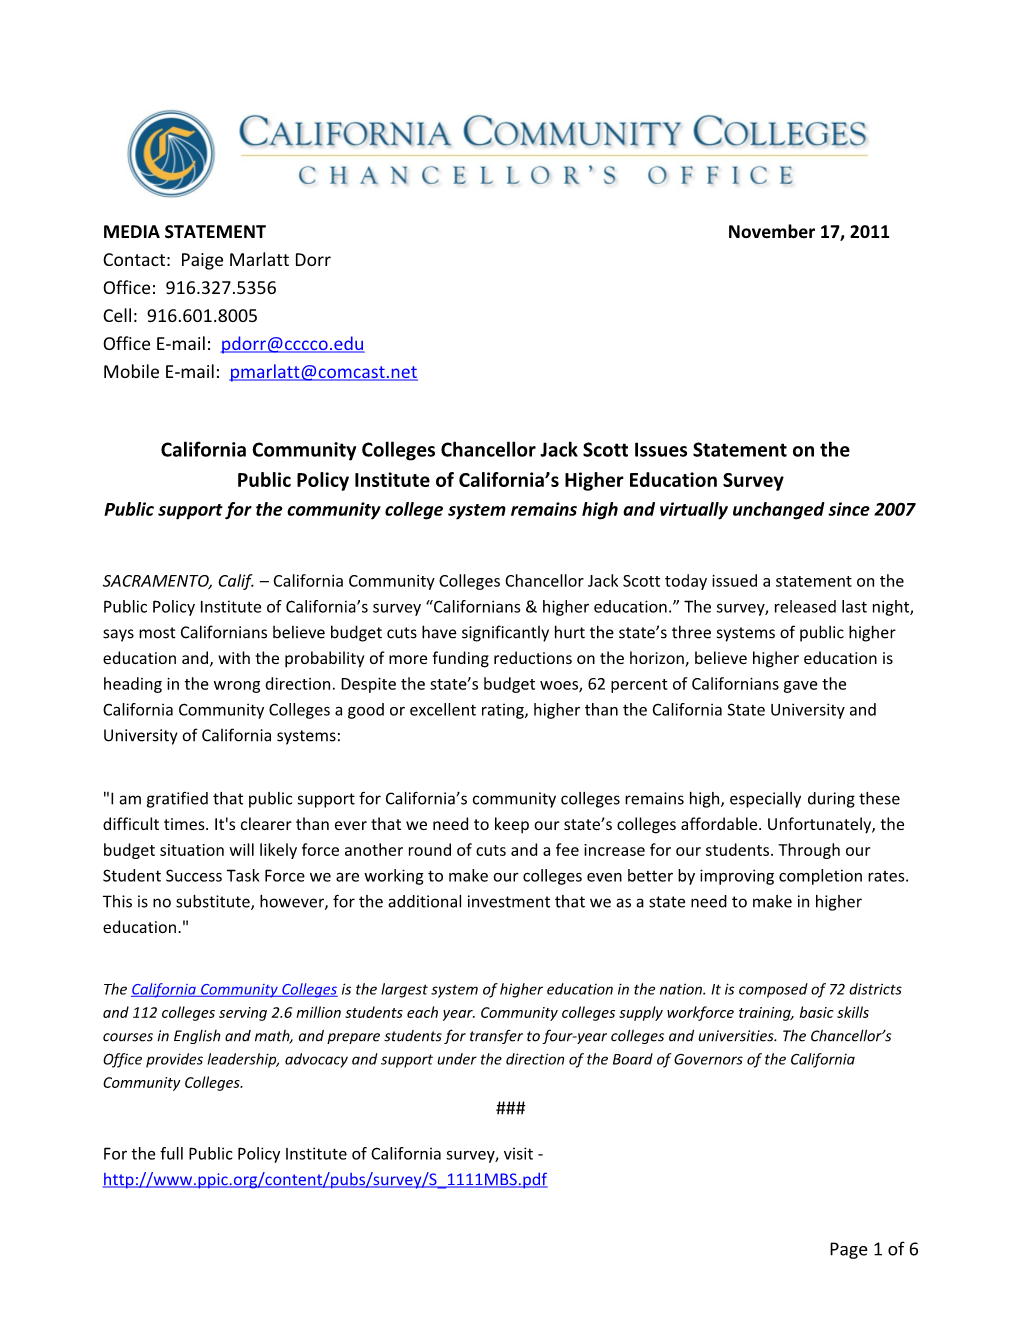 California Community Colleges Chancellor Jack Scott Issues Statement on The